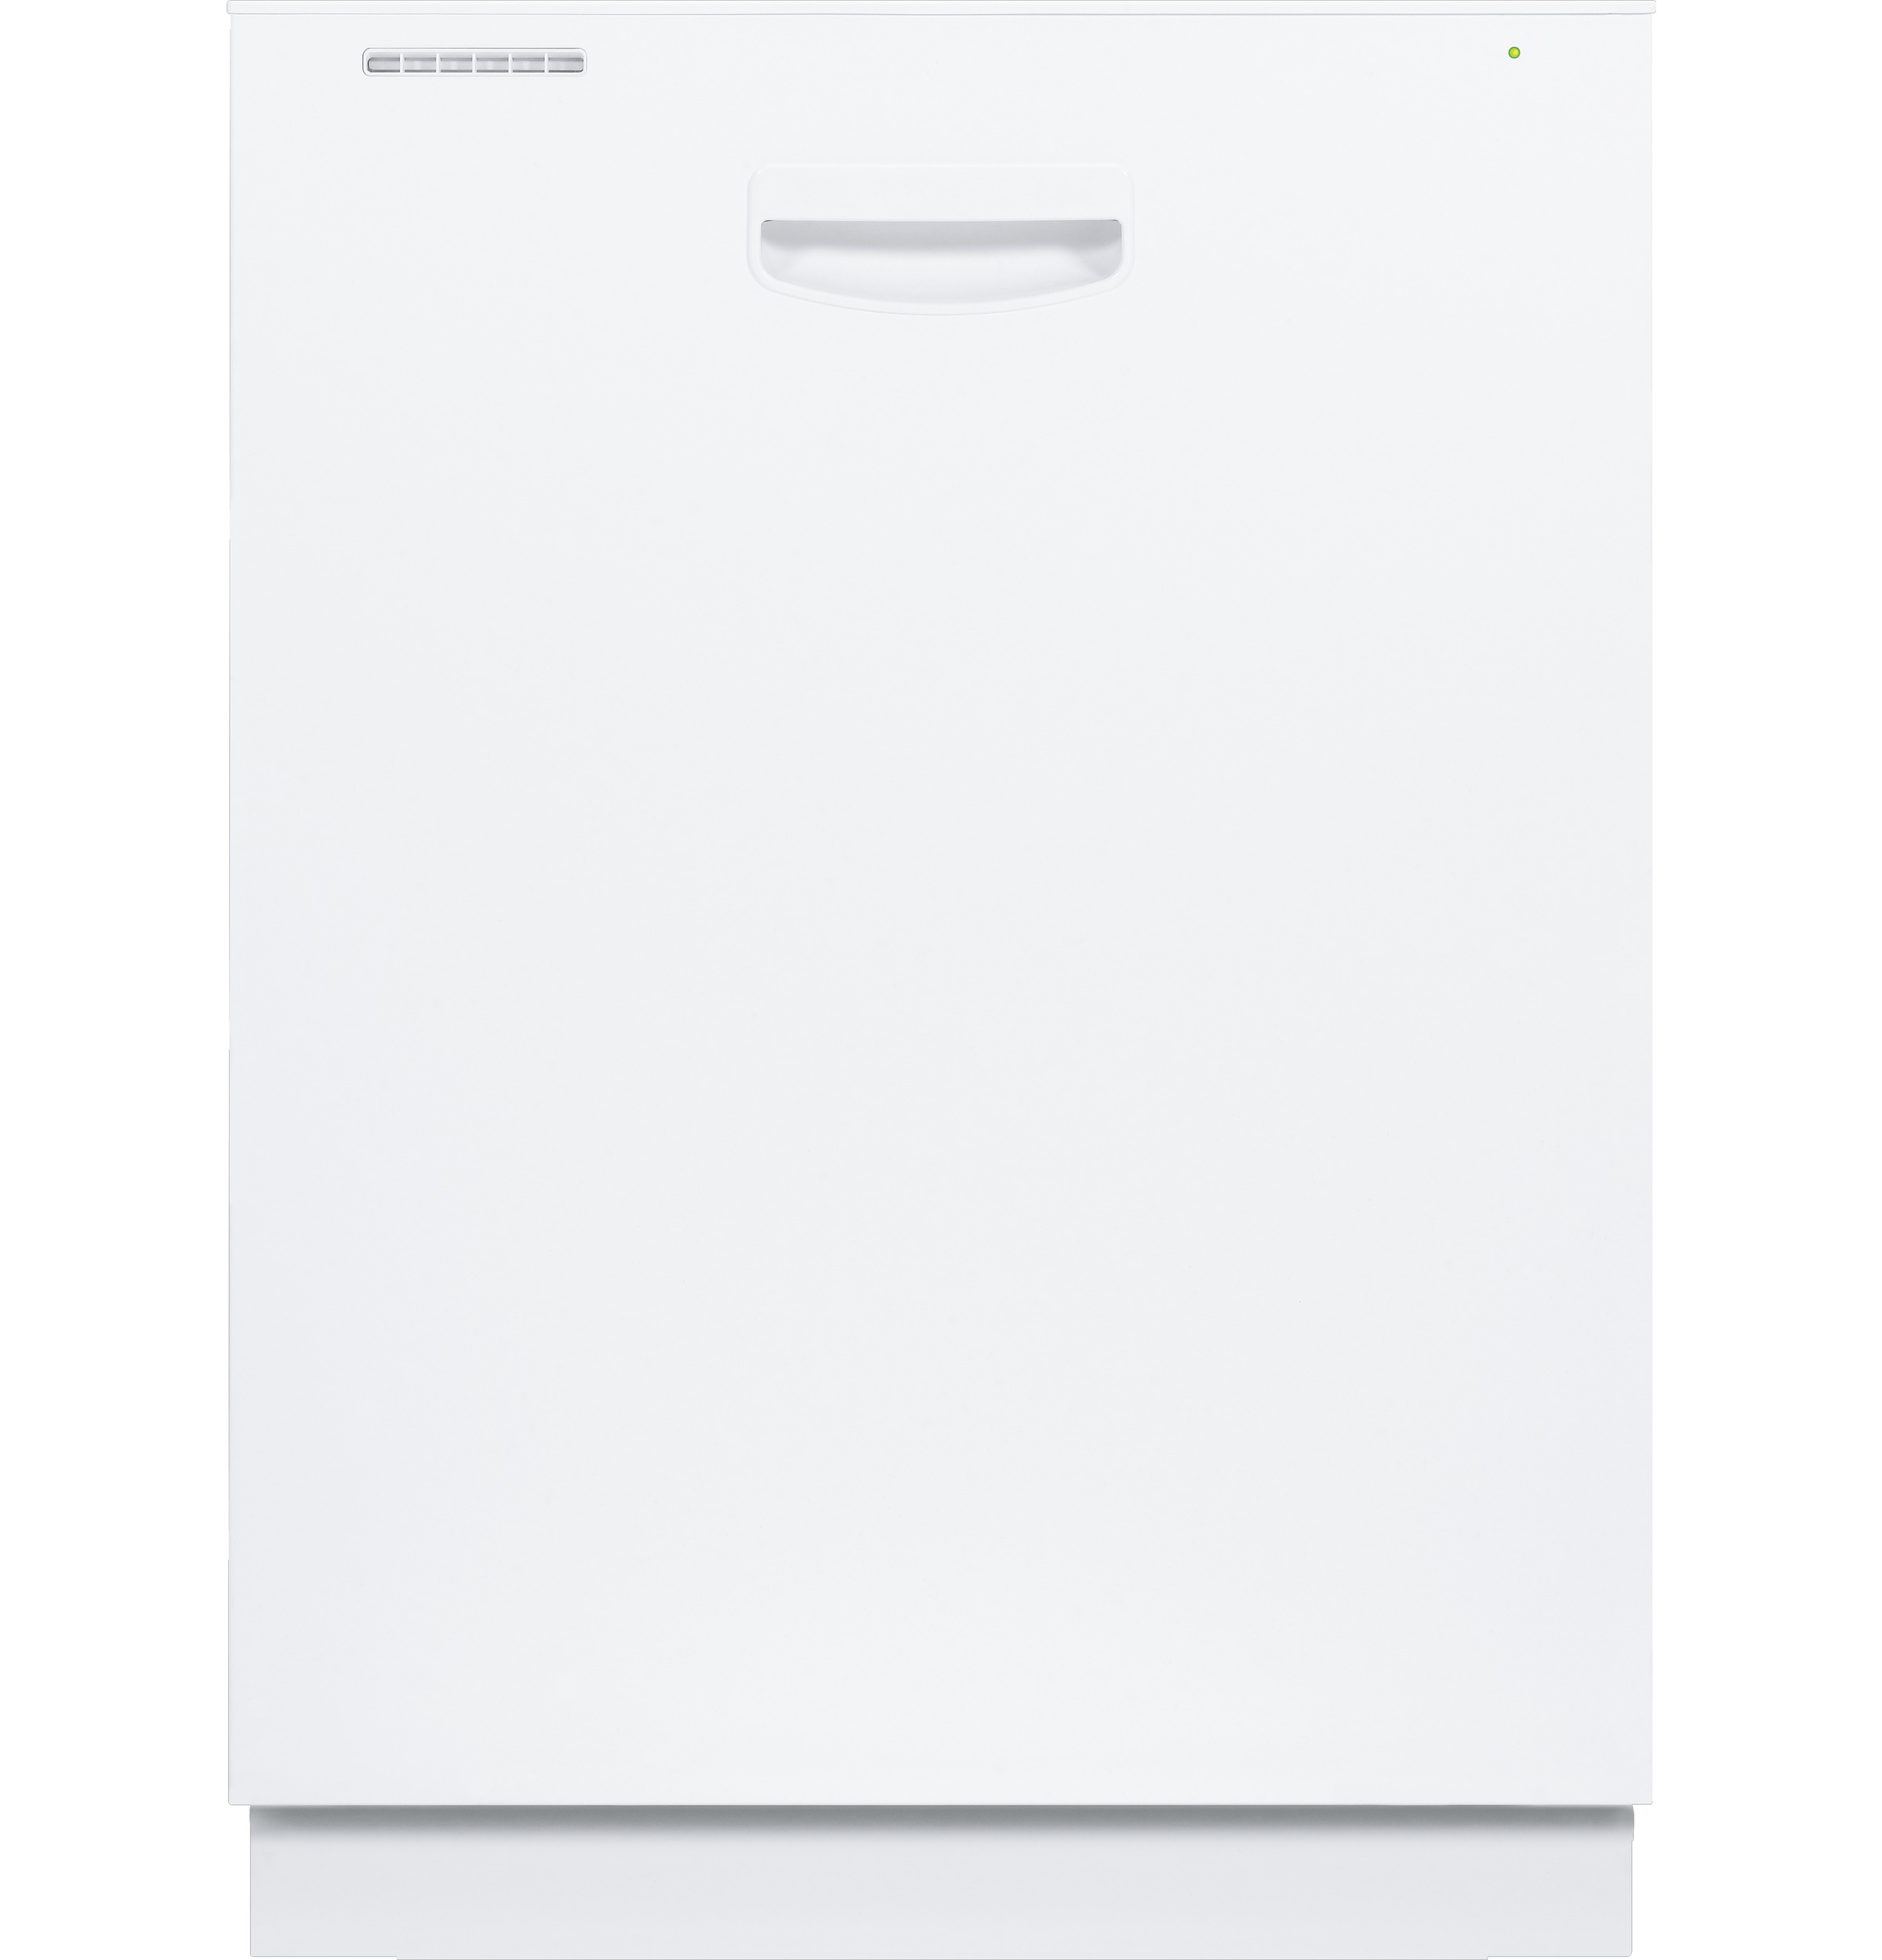 GE® Tall Tub Built-In Dishwasher with Hidden Controls and Recessed Handle